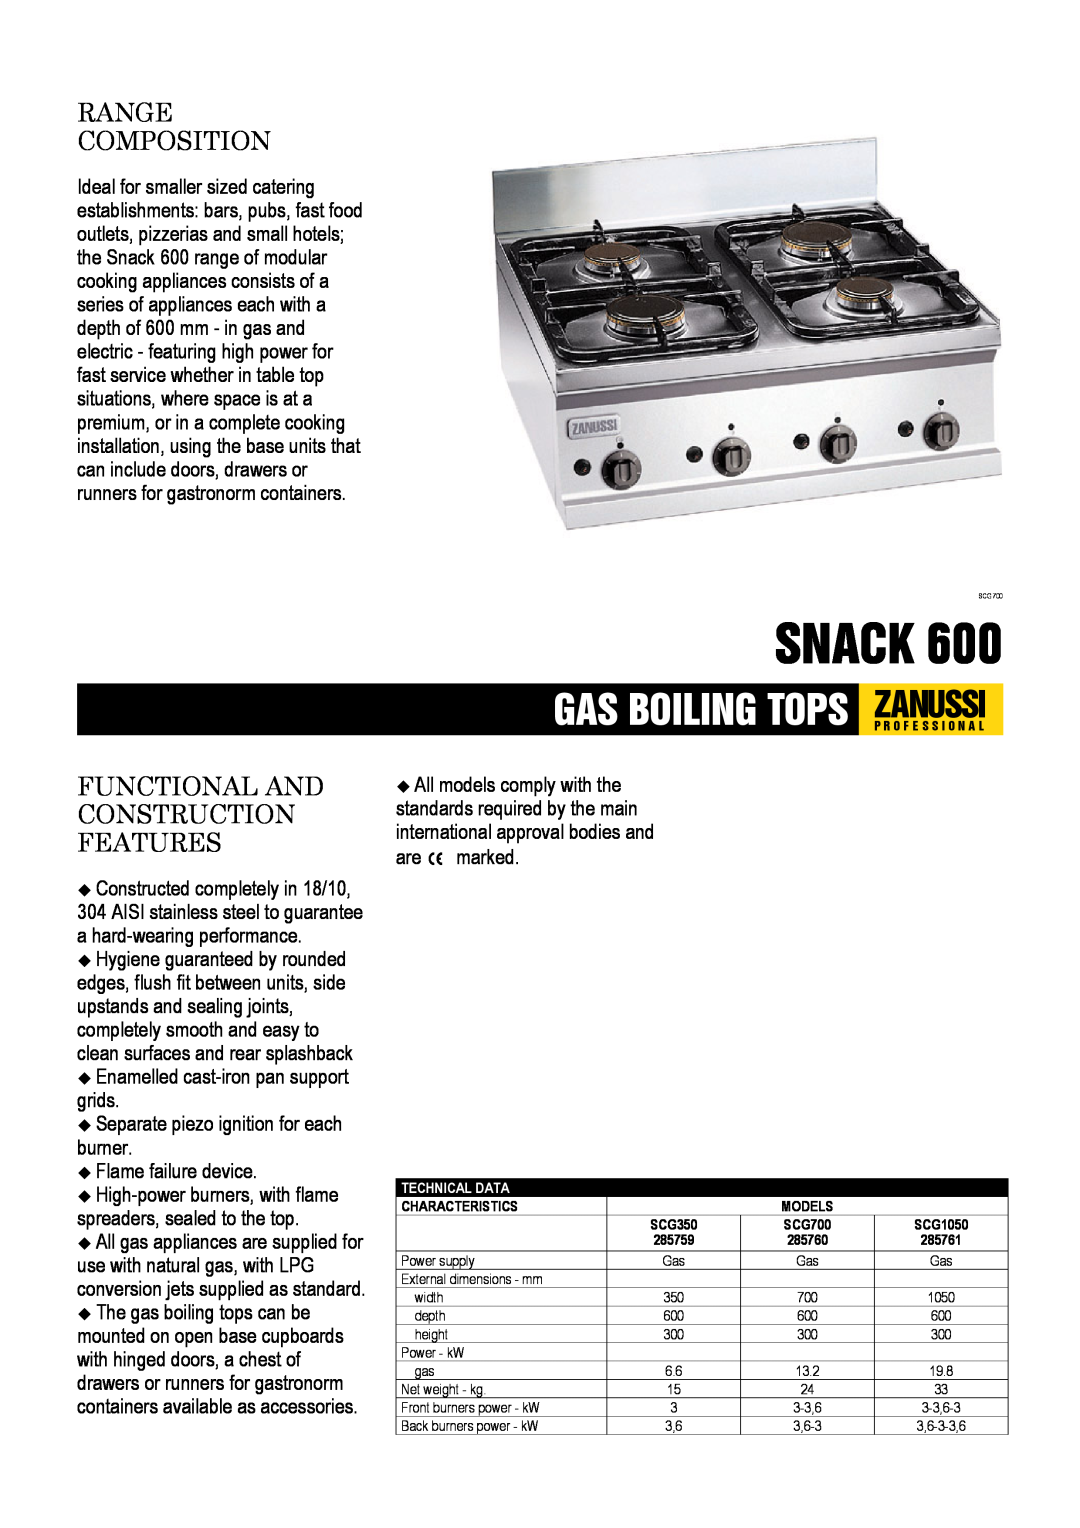 Zanussi SCG700, SCG350 dimensions Snack, Range Composition, Functional And Construction Features, Flame failure device 